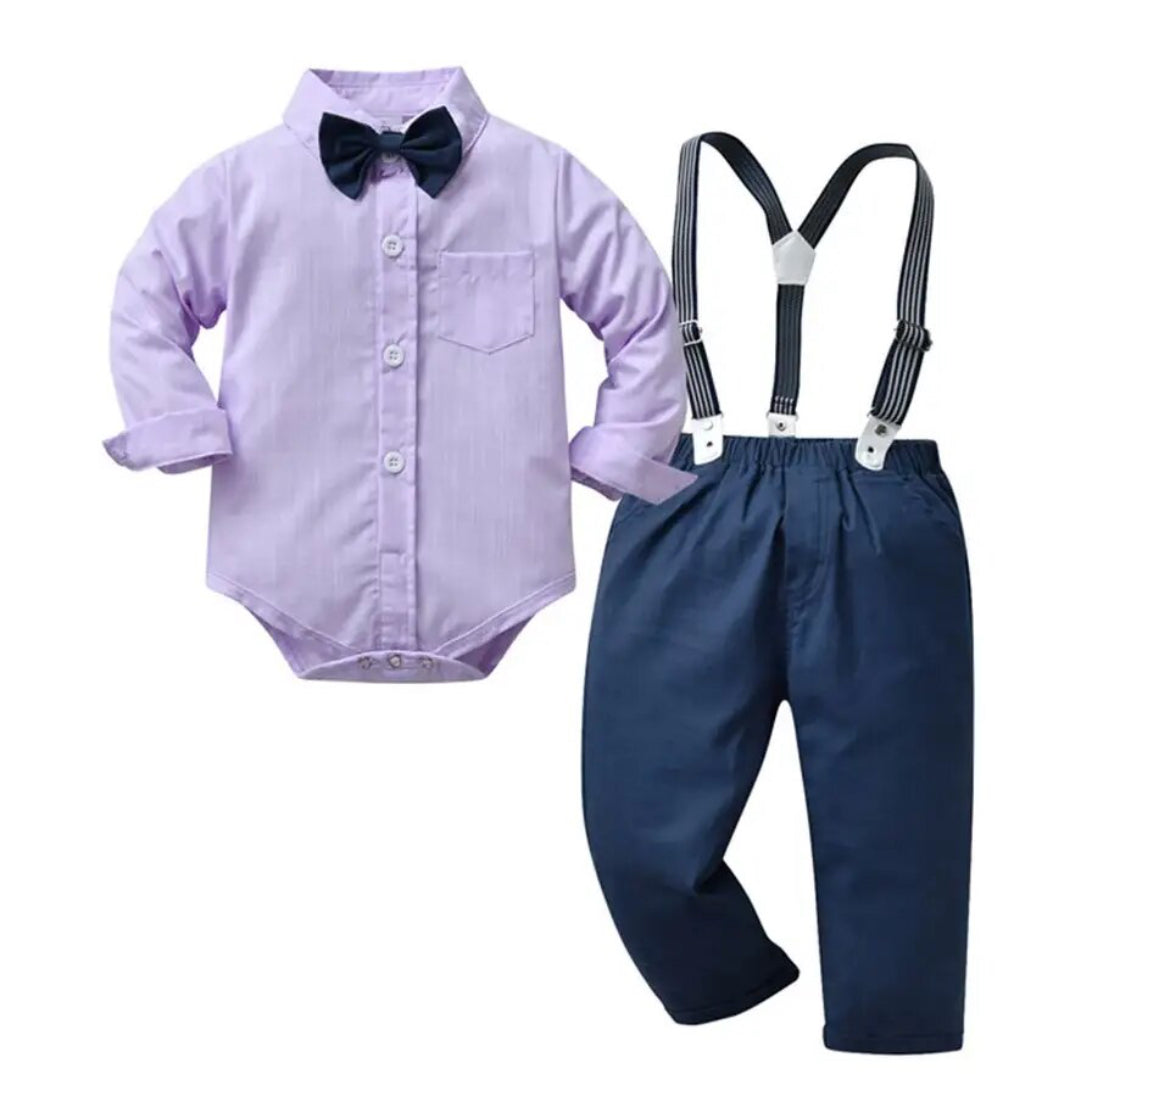 Baby Boys Gentleman Outfit Suit,  Long Sleeve, Suspenders Pants Bow Tie Clothes Set